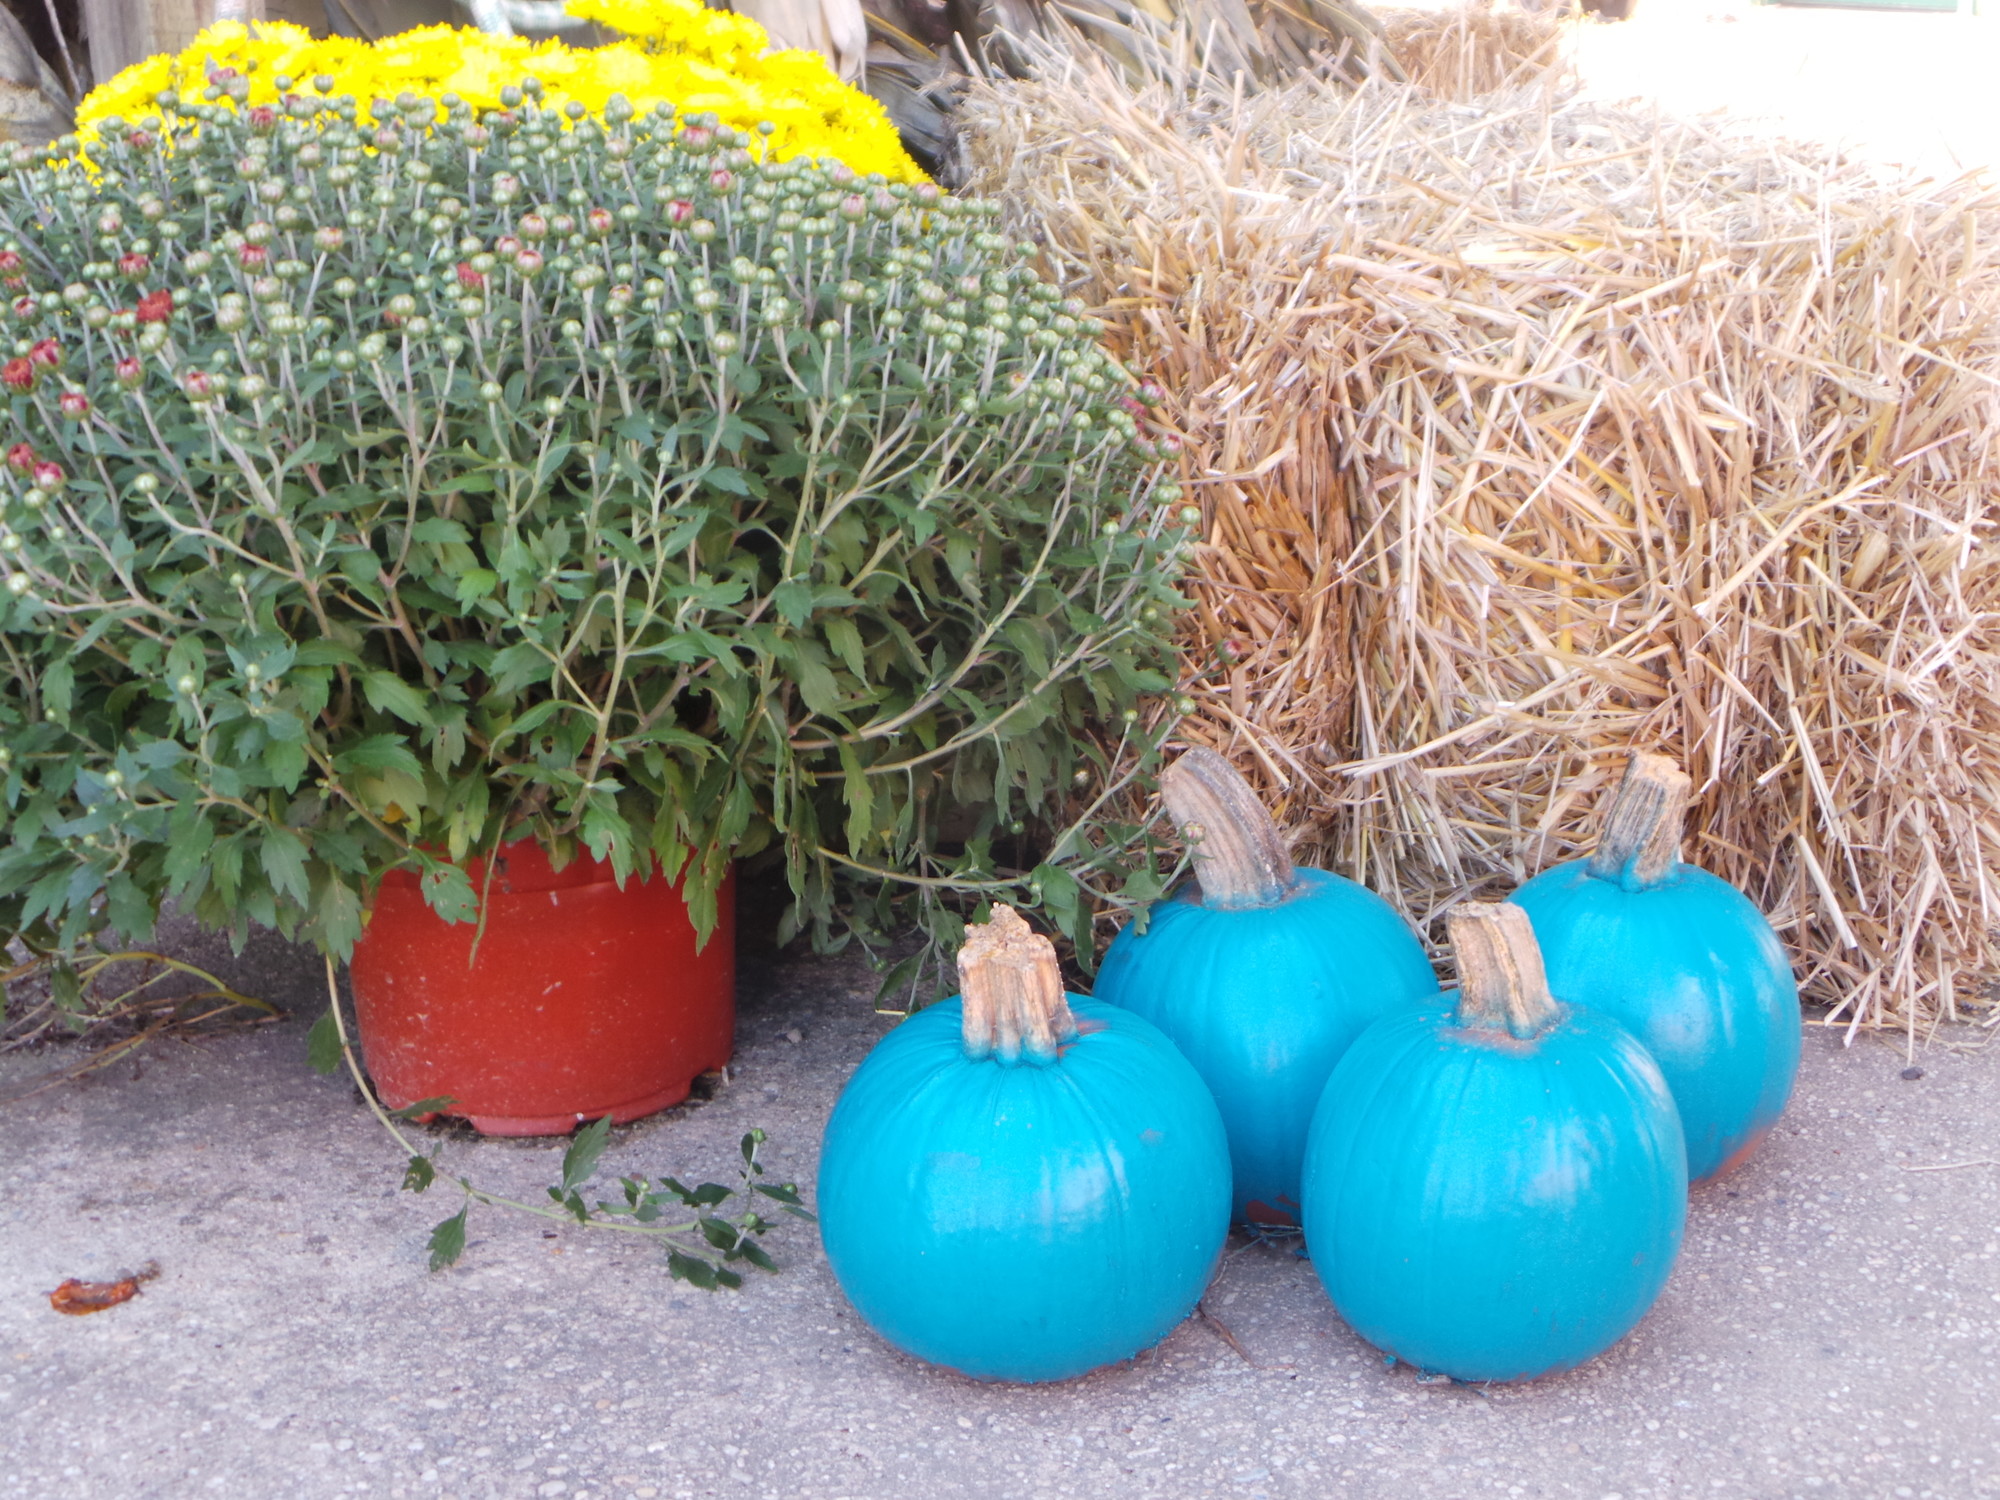 Pumpkins have been sprayed painted teal and are available locally at Crossroads Farms for $2.99.